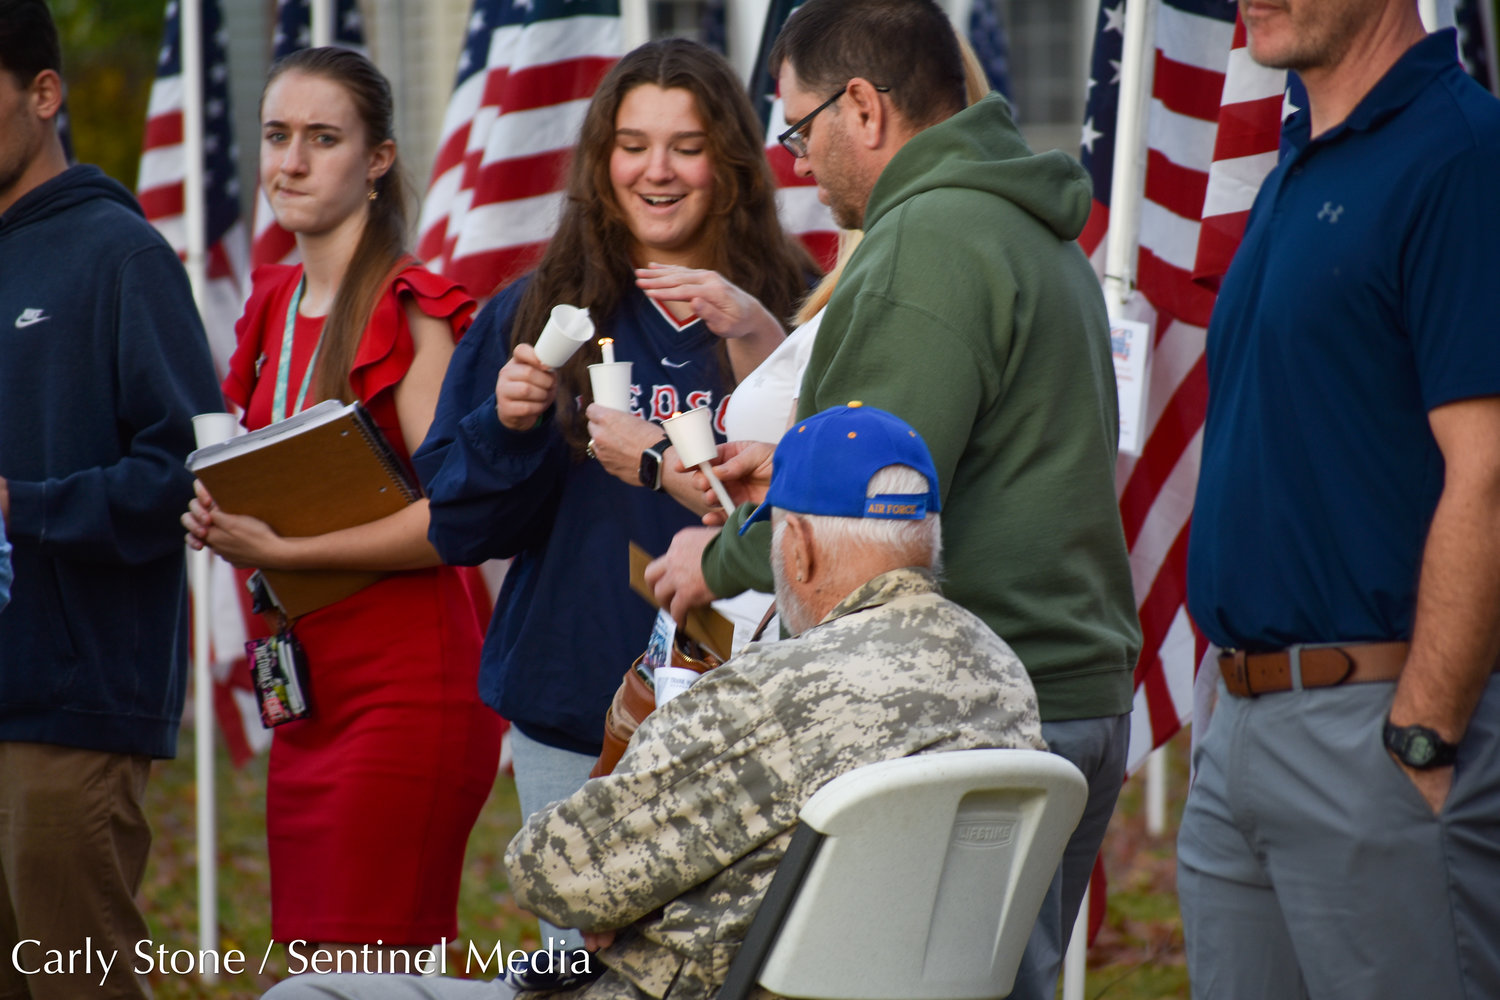 After the recognition ceremony in the Parkway Center on Saturday, November 5, people gathered among the Healing Field of flags at Utica's Memorial Parkway to participate in a candlelight ceremony in honor of the nation's veterans.